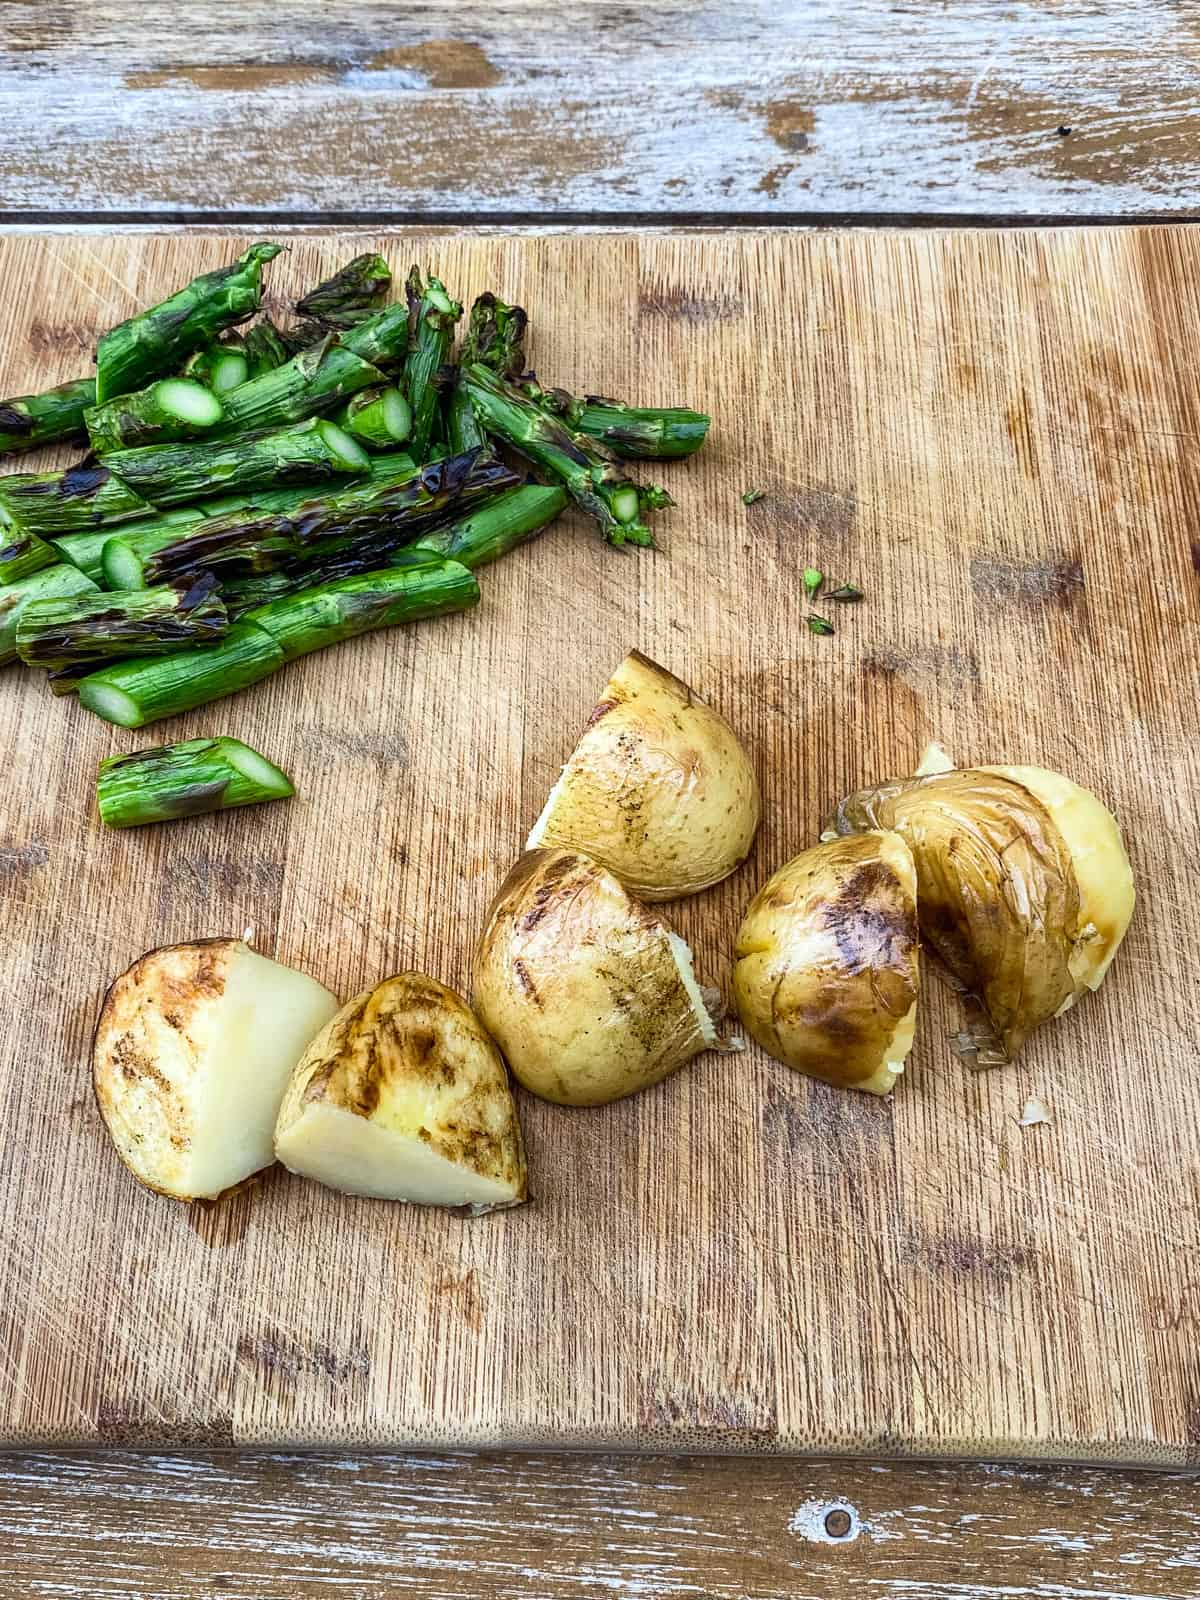 Once the vegetables are grilled, chop up the asparagus and potatoes.